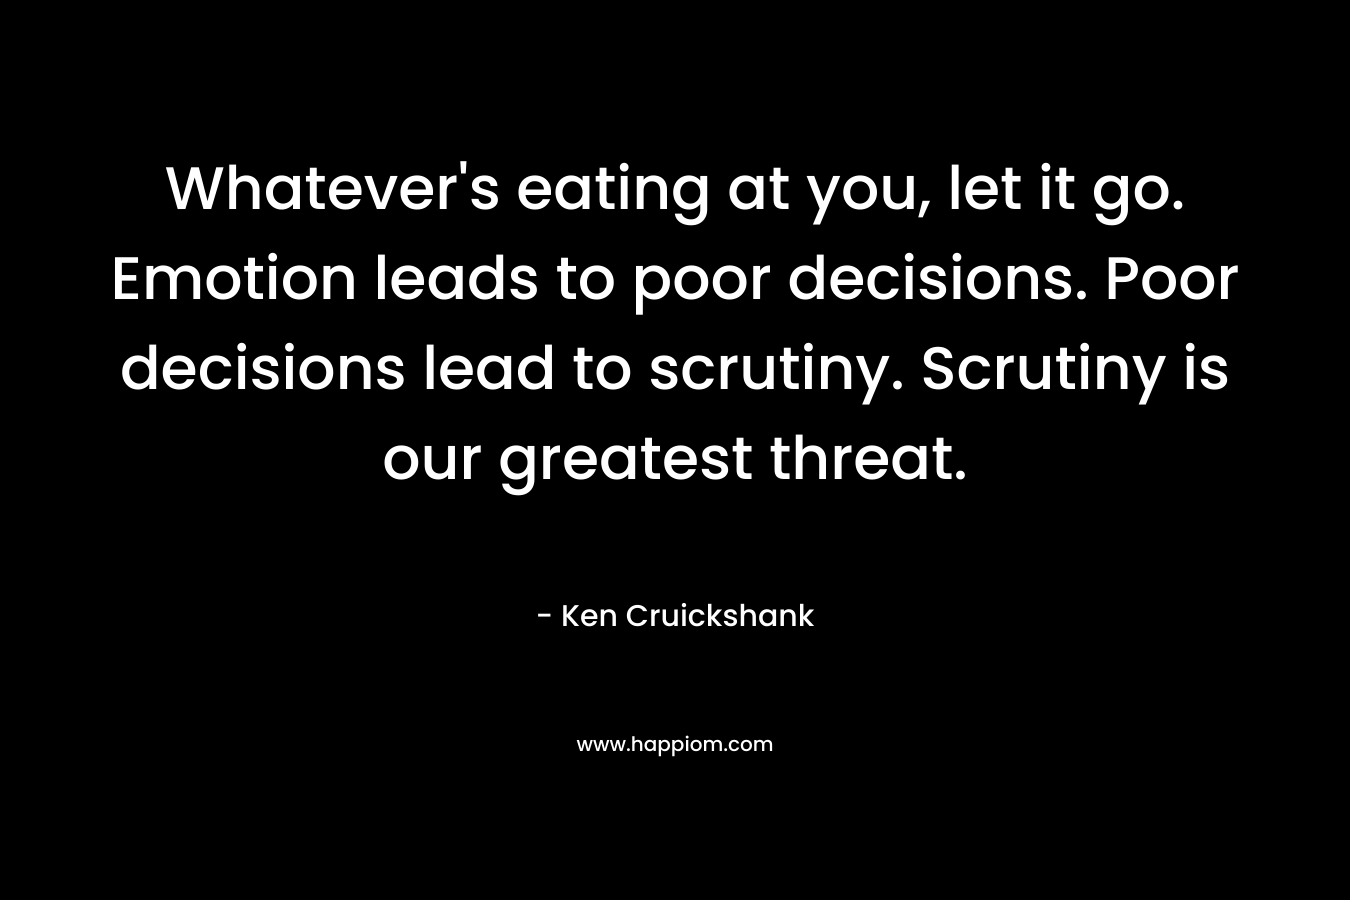 Whatever’s eating at you, let it go. Emotion leads to poor decisions. Poor decisions lead to scrutiny. Scrutiny is our greatest threat. – Ken Cruickshank